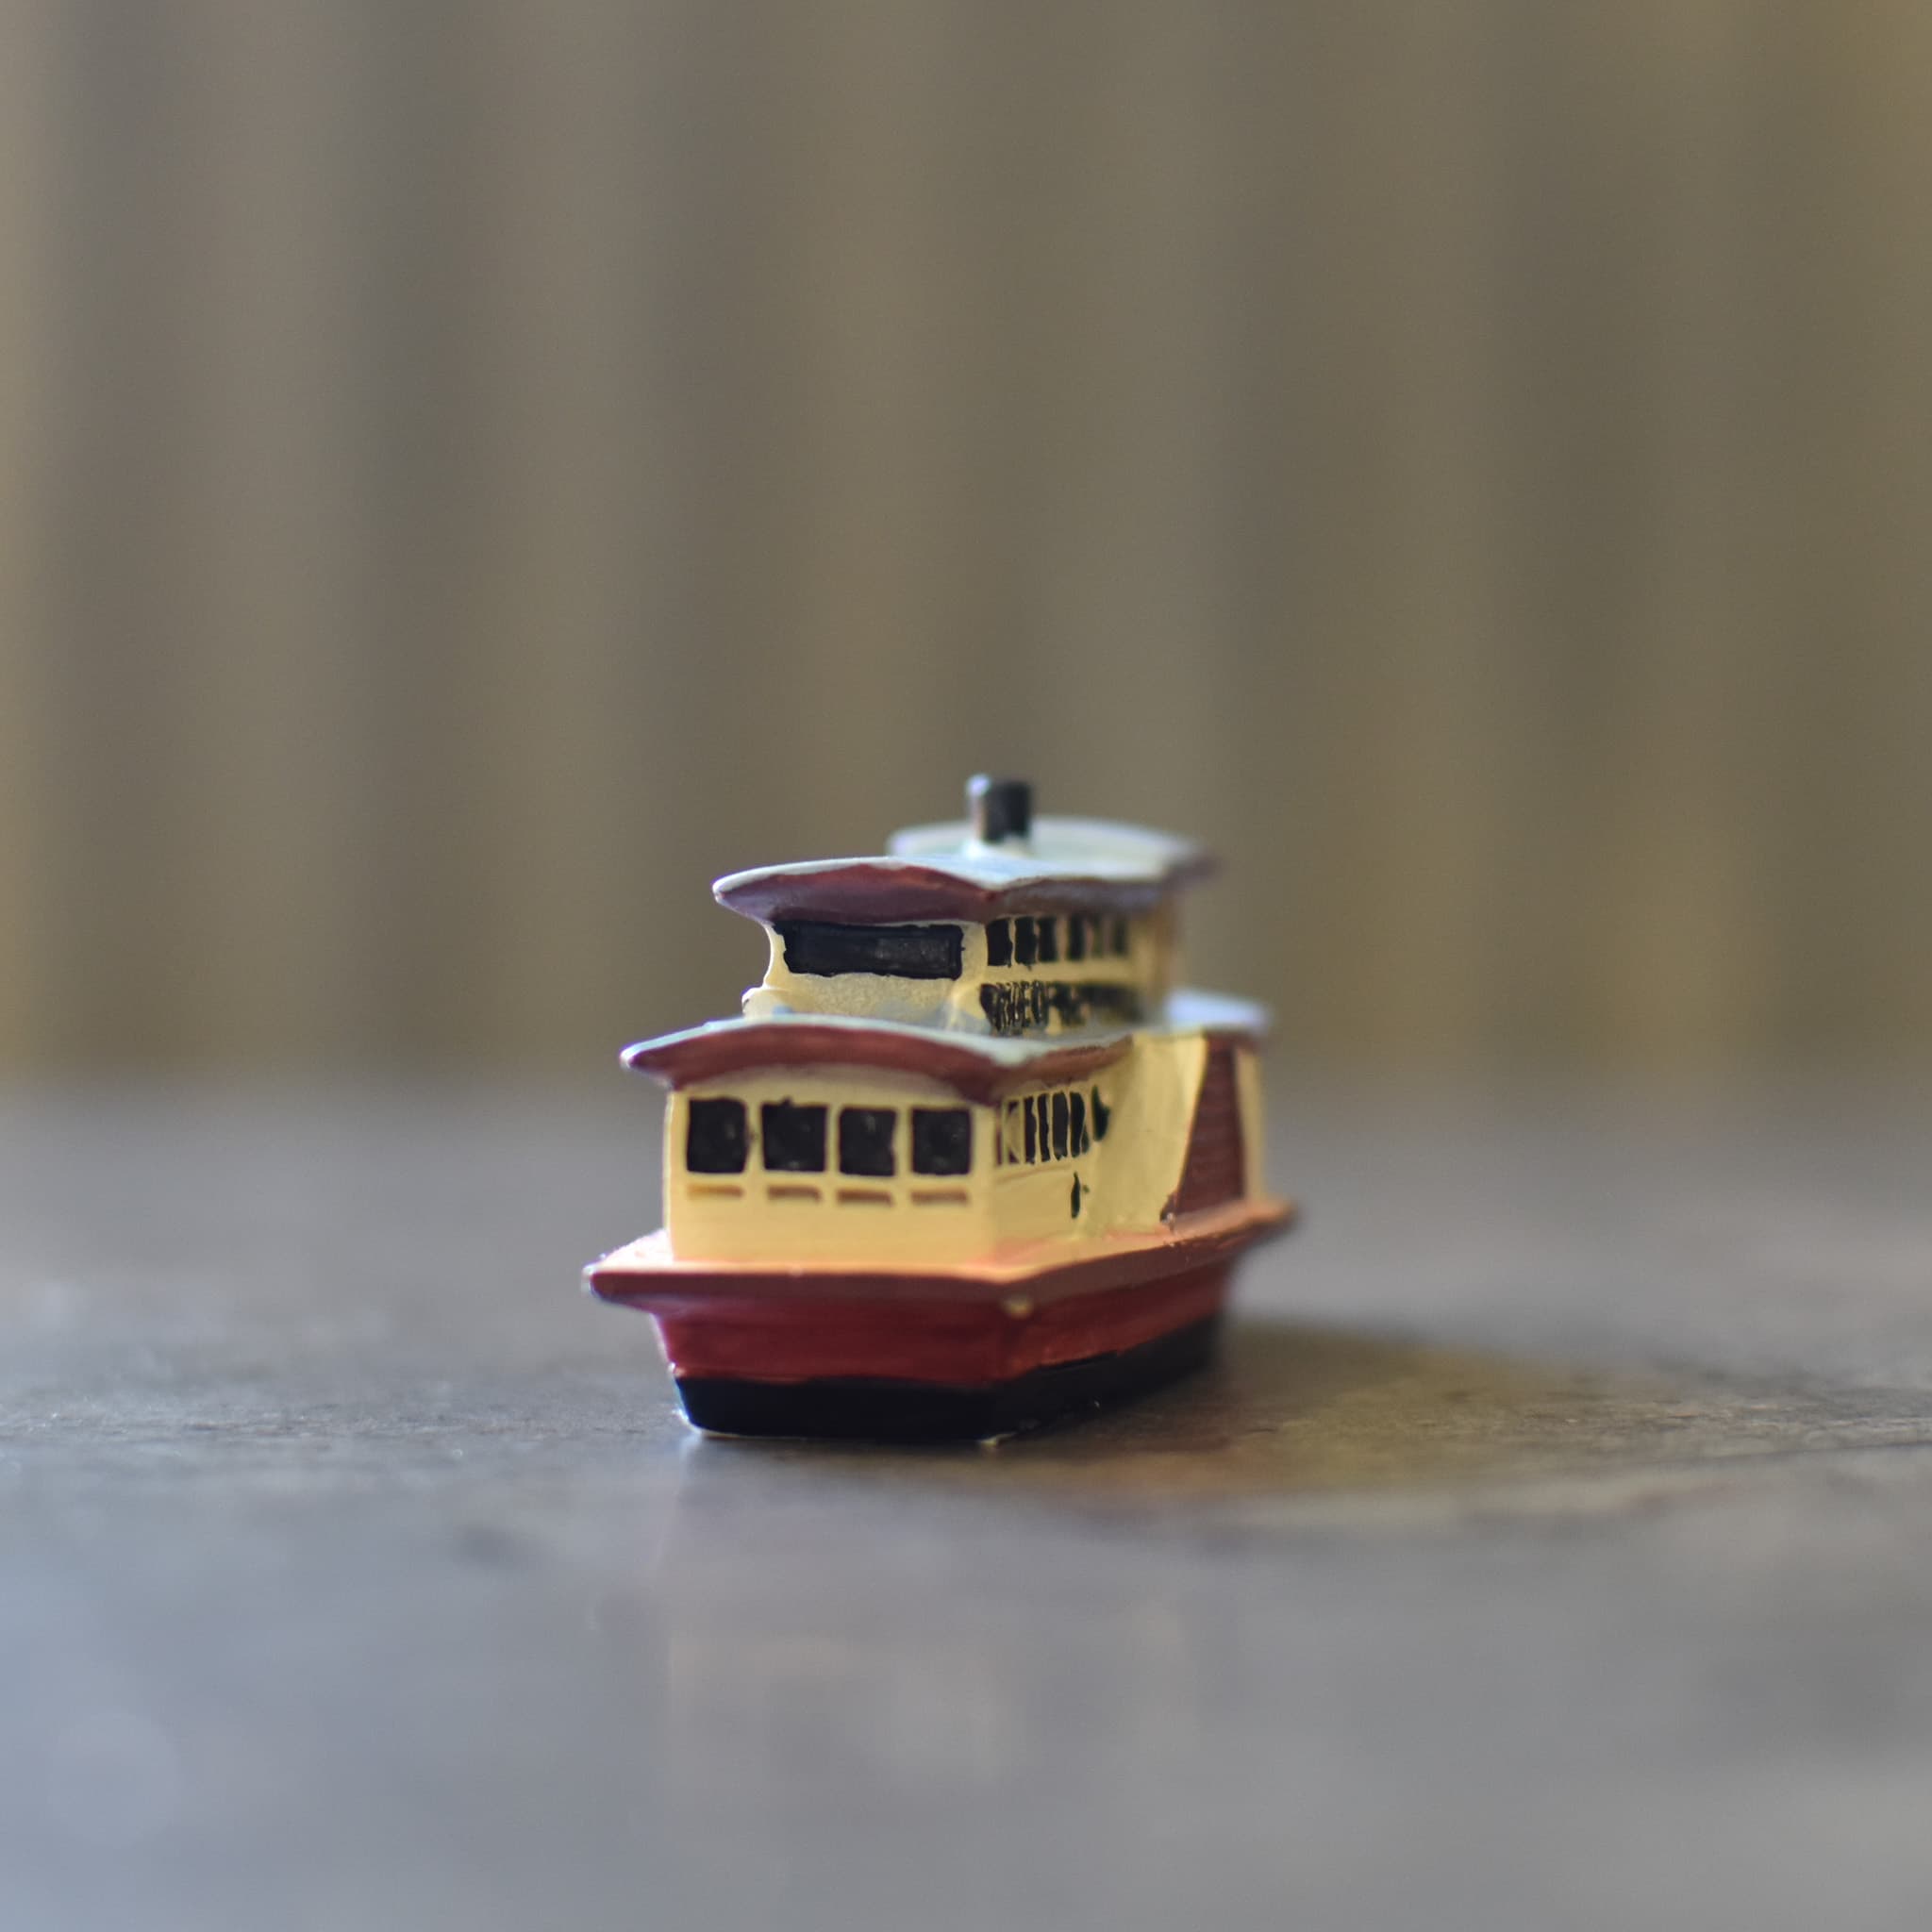 Model Pride of the Murray Paddle wheeler small